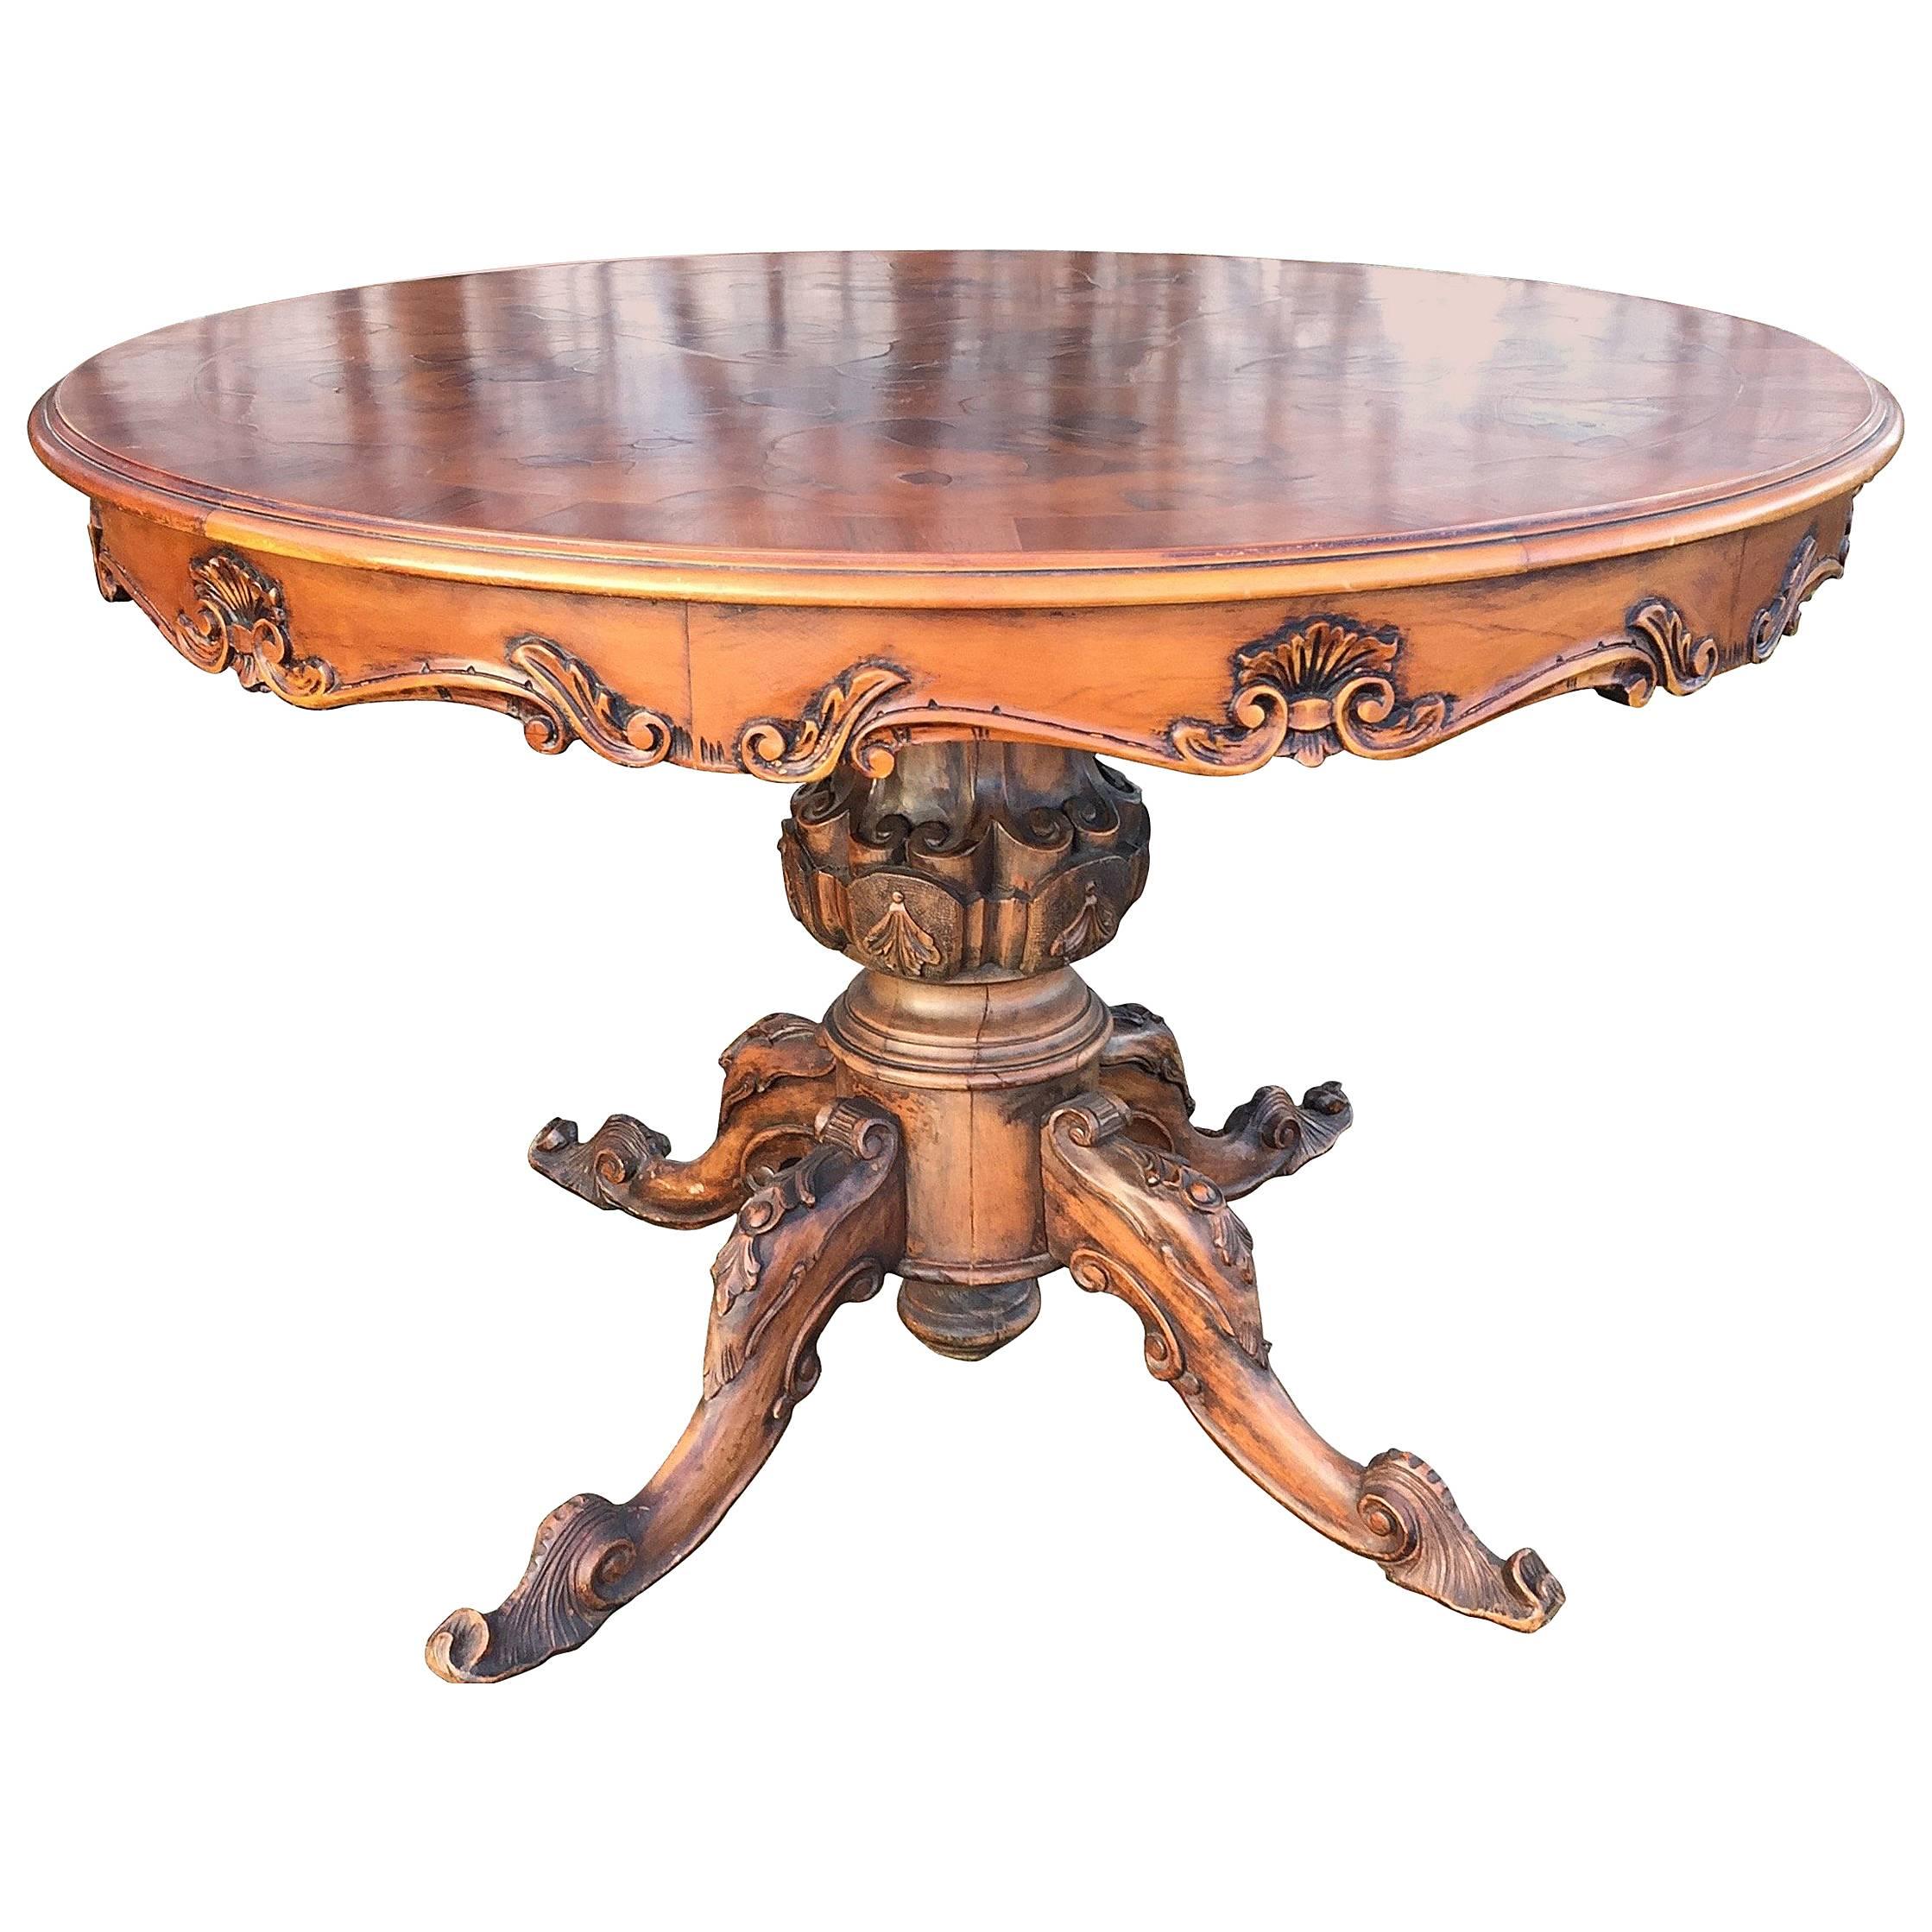 Italian Baroque Revival Carved Wood Round Dining or Center Table For Sale